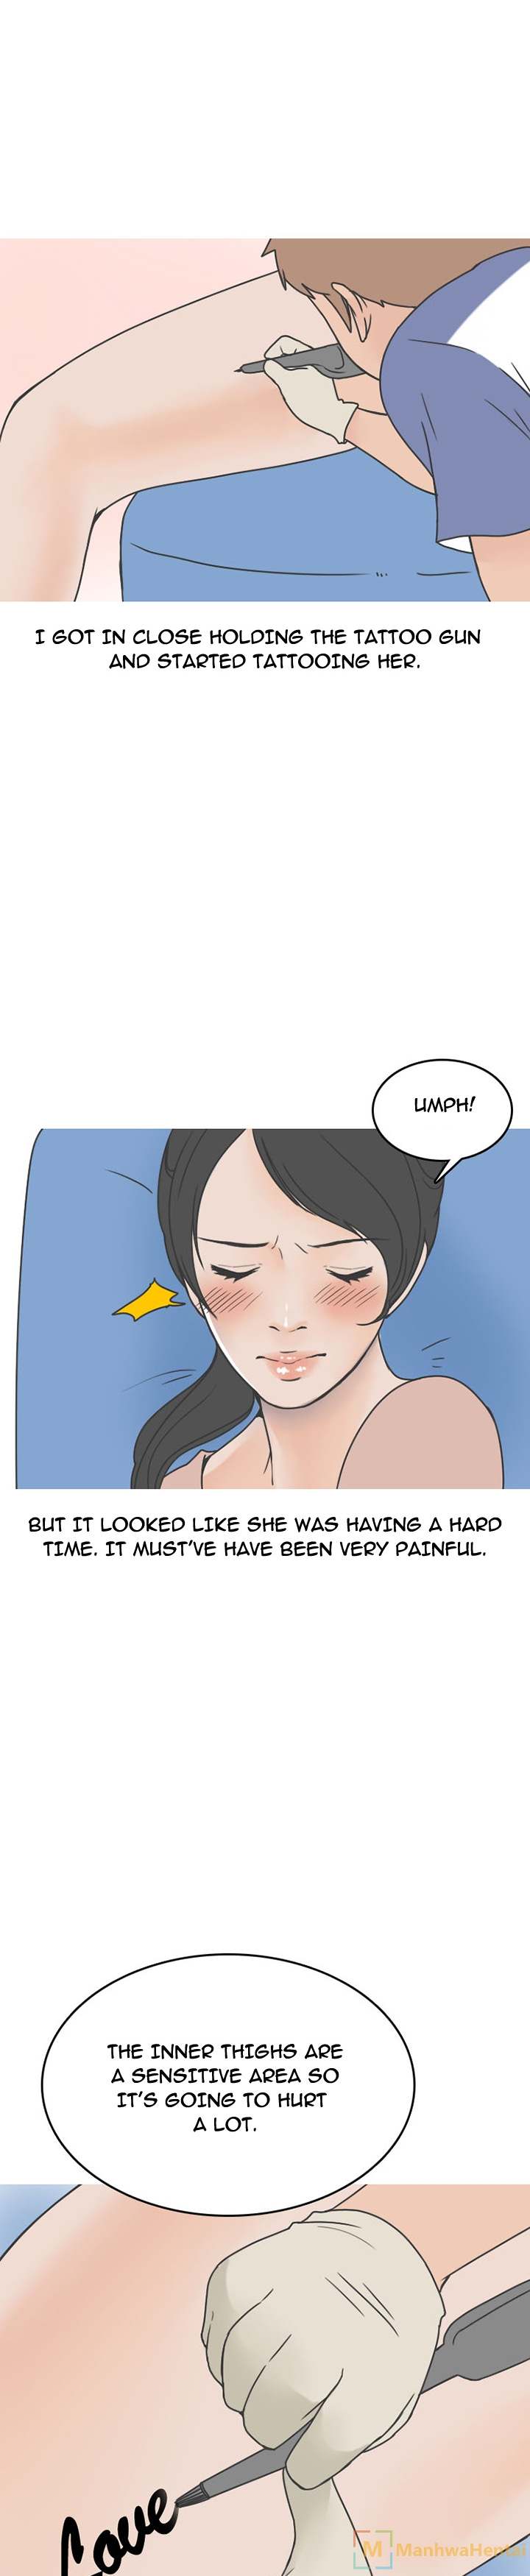 NEXT Gossip Chapter 48 - Page 2